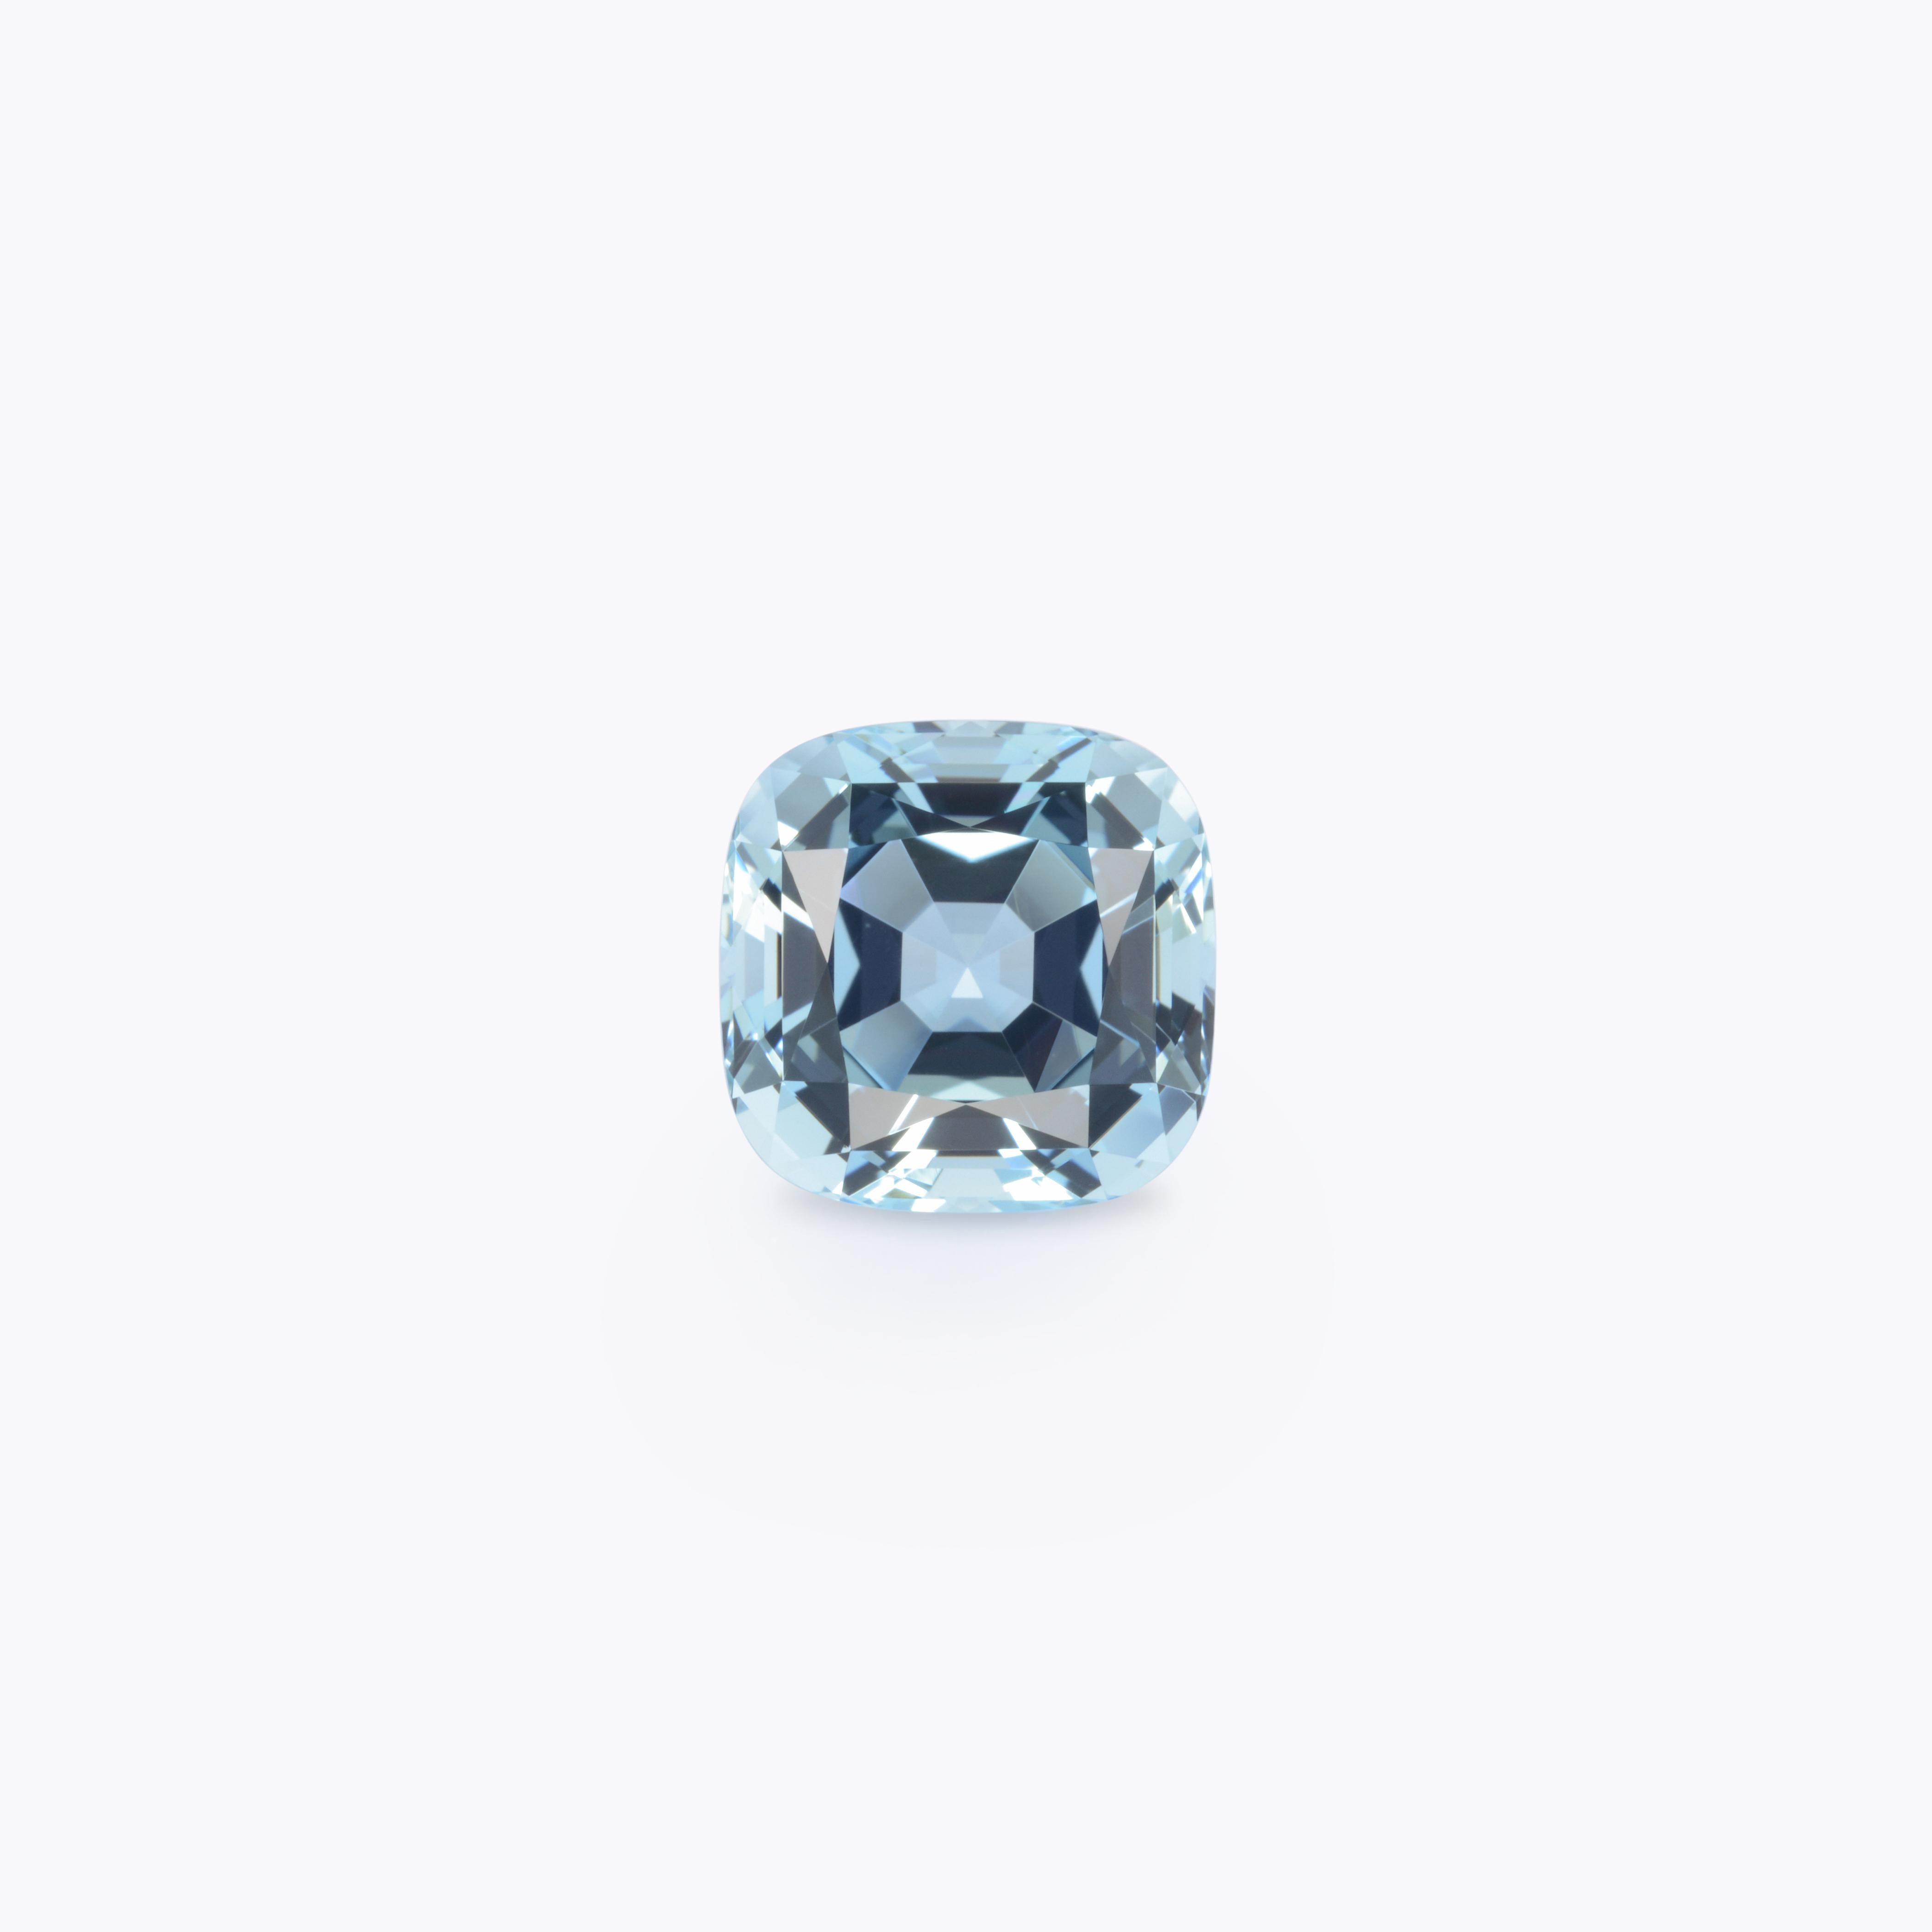 Desirable 11.20 carat Aquamarine square cushion gem, offered loose to someone special.
Dimensions: 13.60 x 13.50 x 10.10 mm
Returns are accepted and paid by us within 7 days of delivery.
We offer supreme custom jewelry work upon request. Please